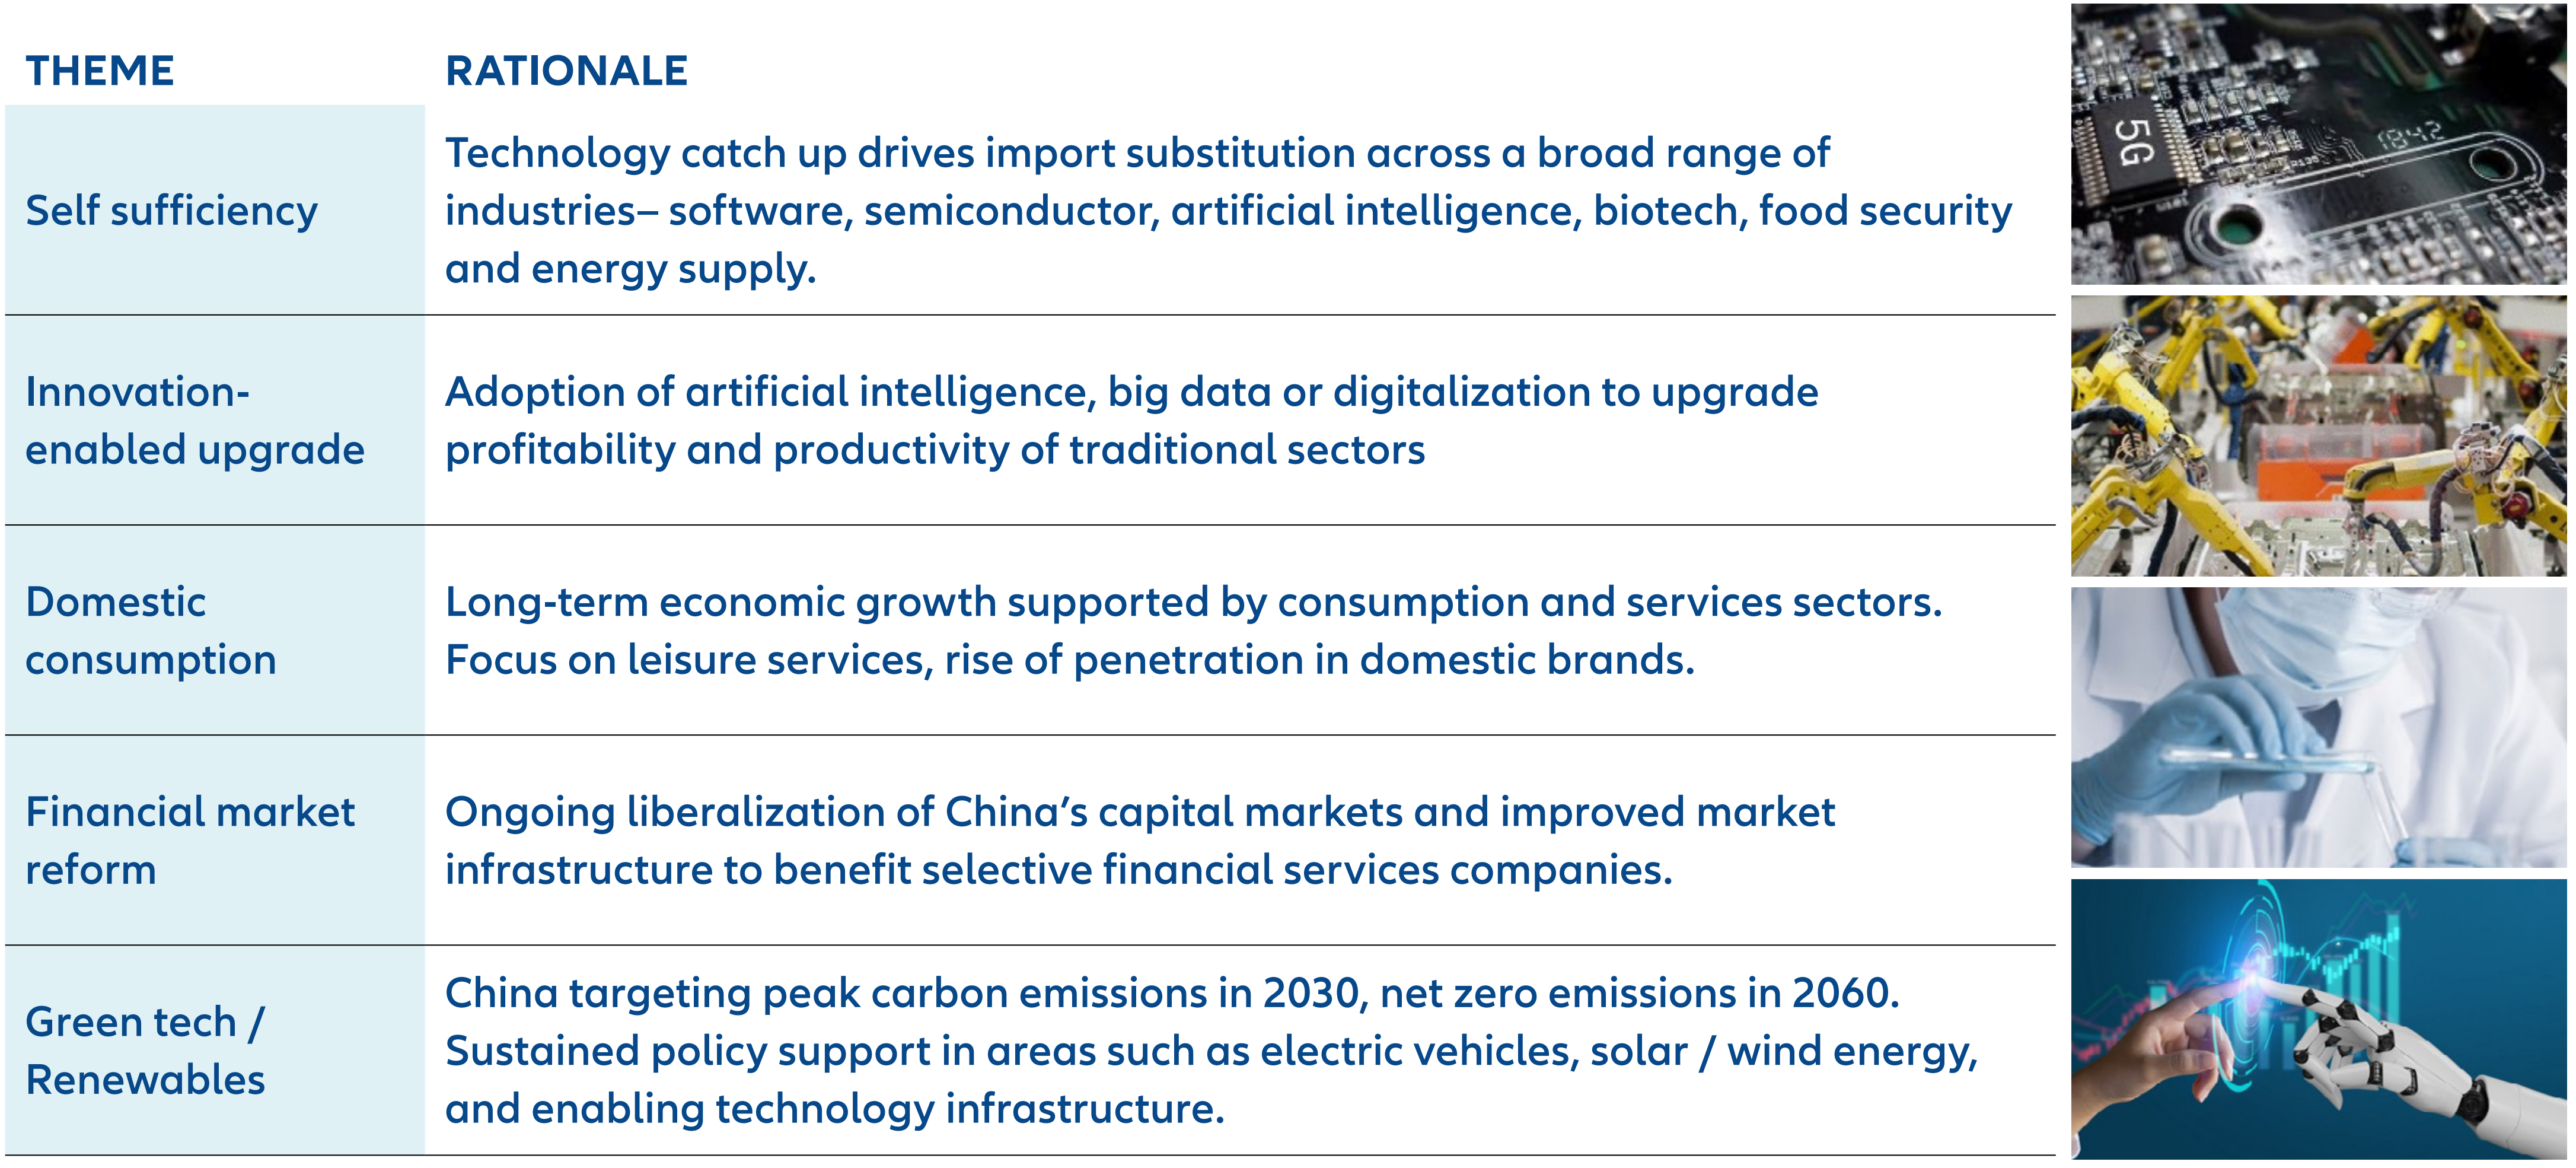 Exhibit 6: Key areas where we see structural growth potential